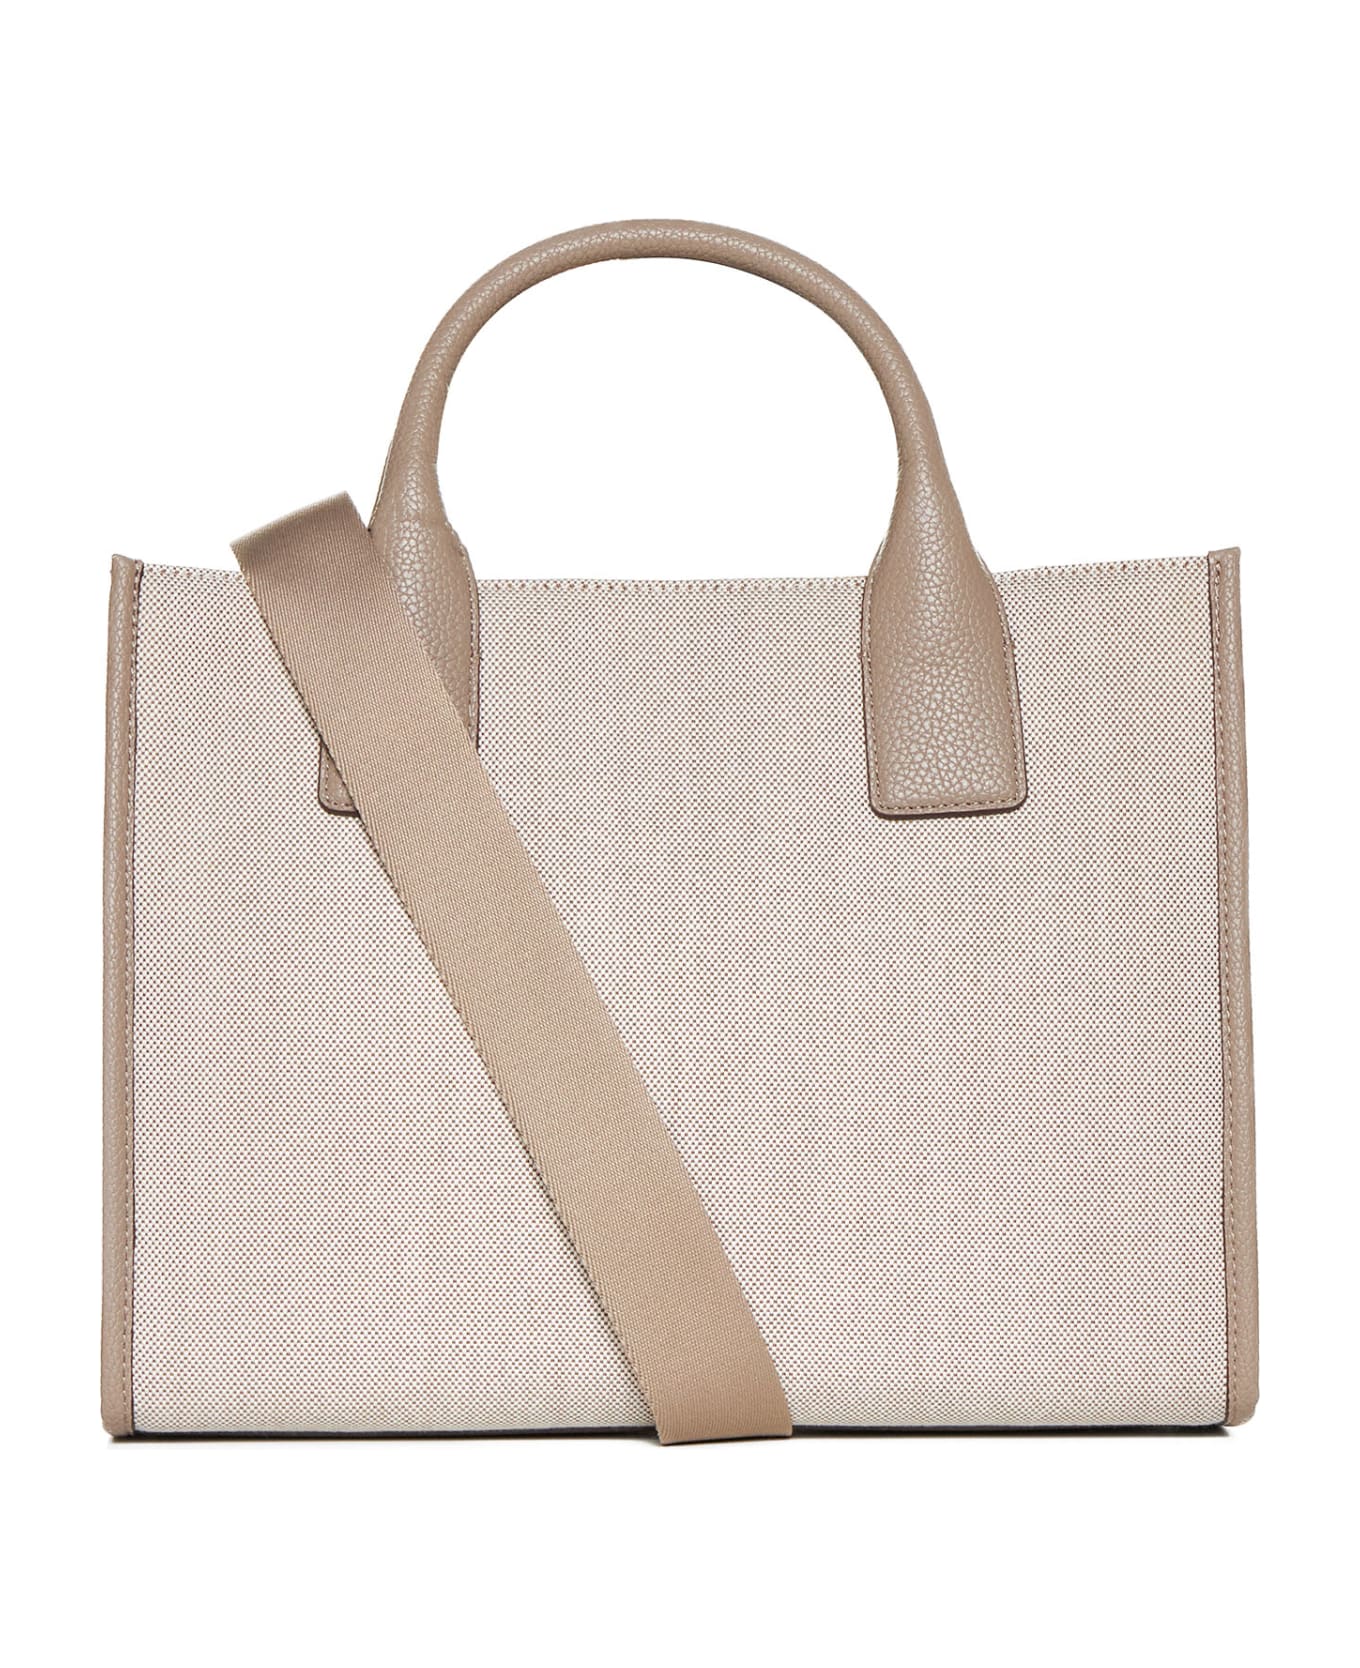 DKNY Tote - Natural multi トートバッグ